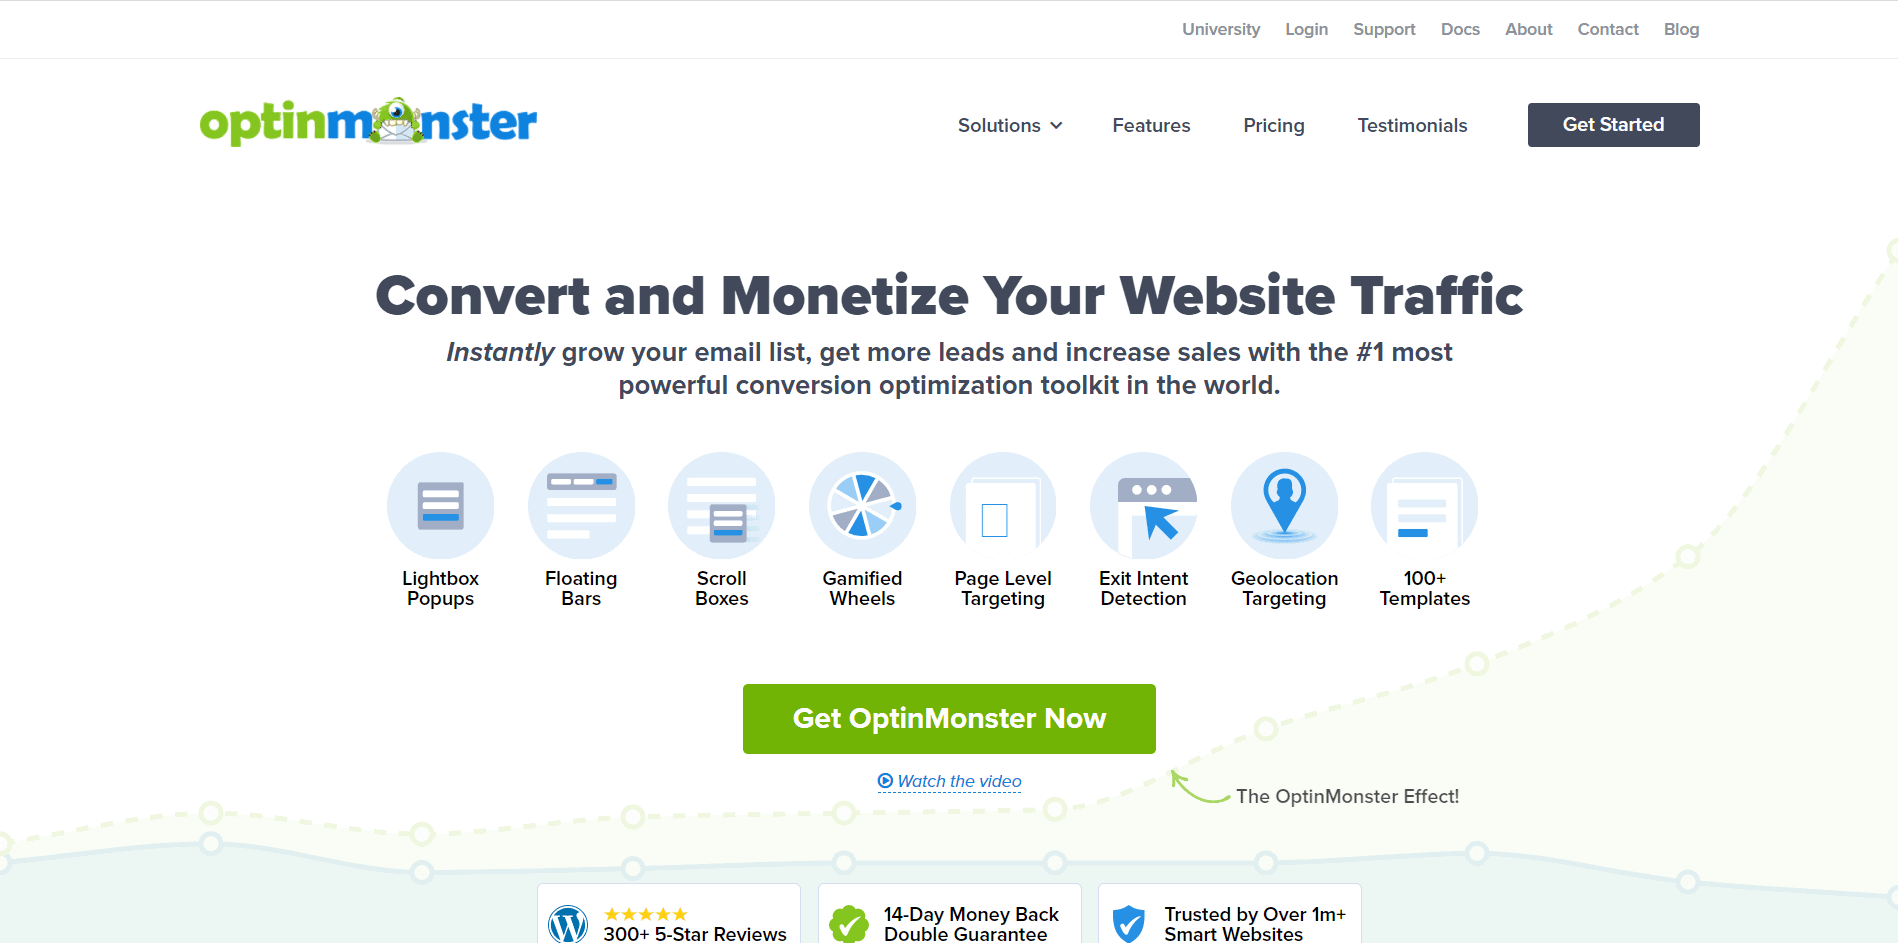 optinmonster- Email Marketing Automation Tools